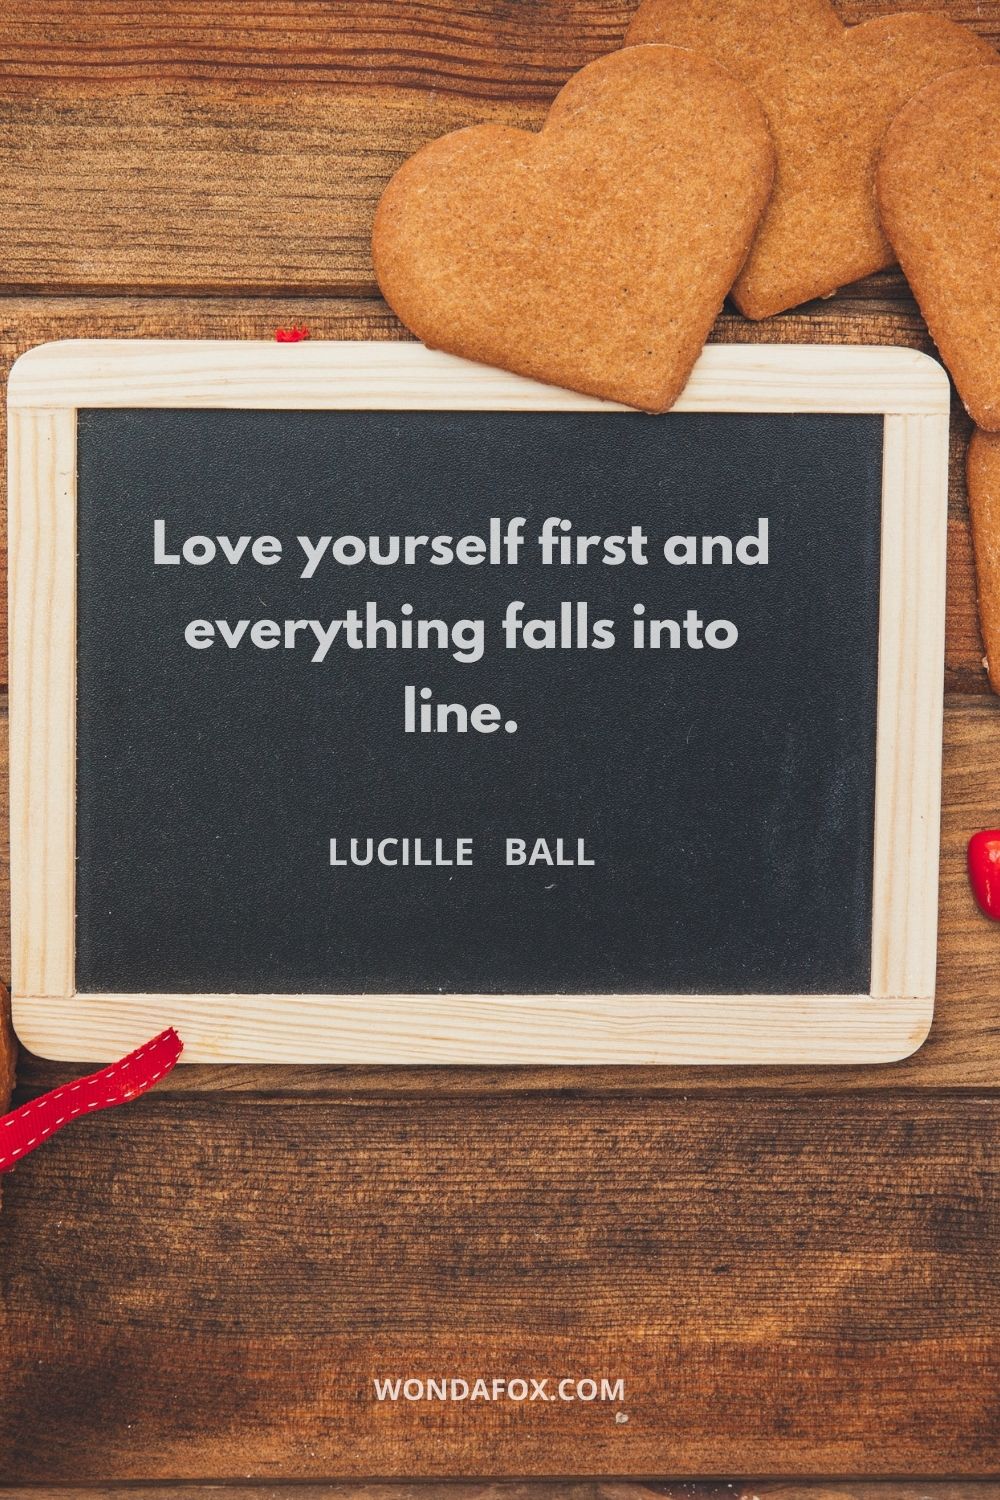 Love yourself first and everything falls into line.